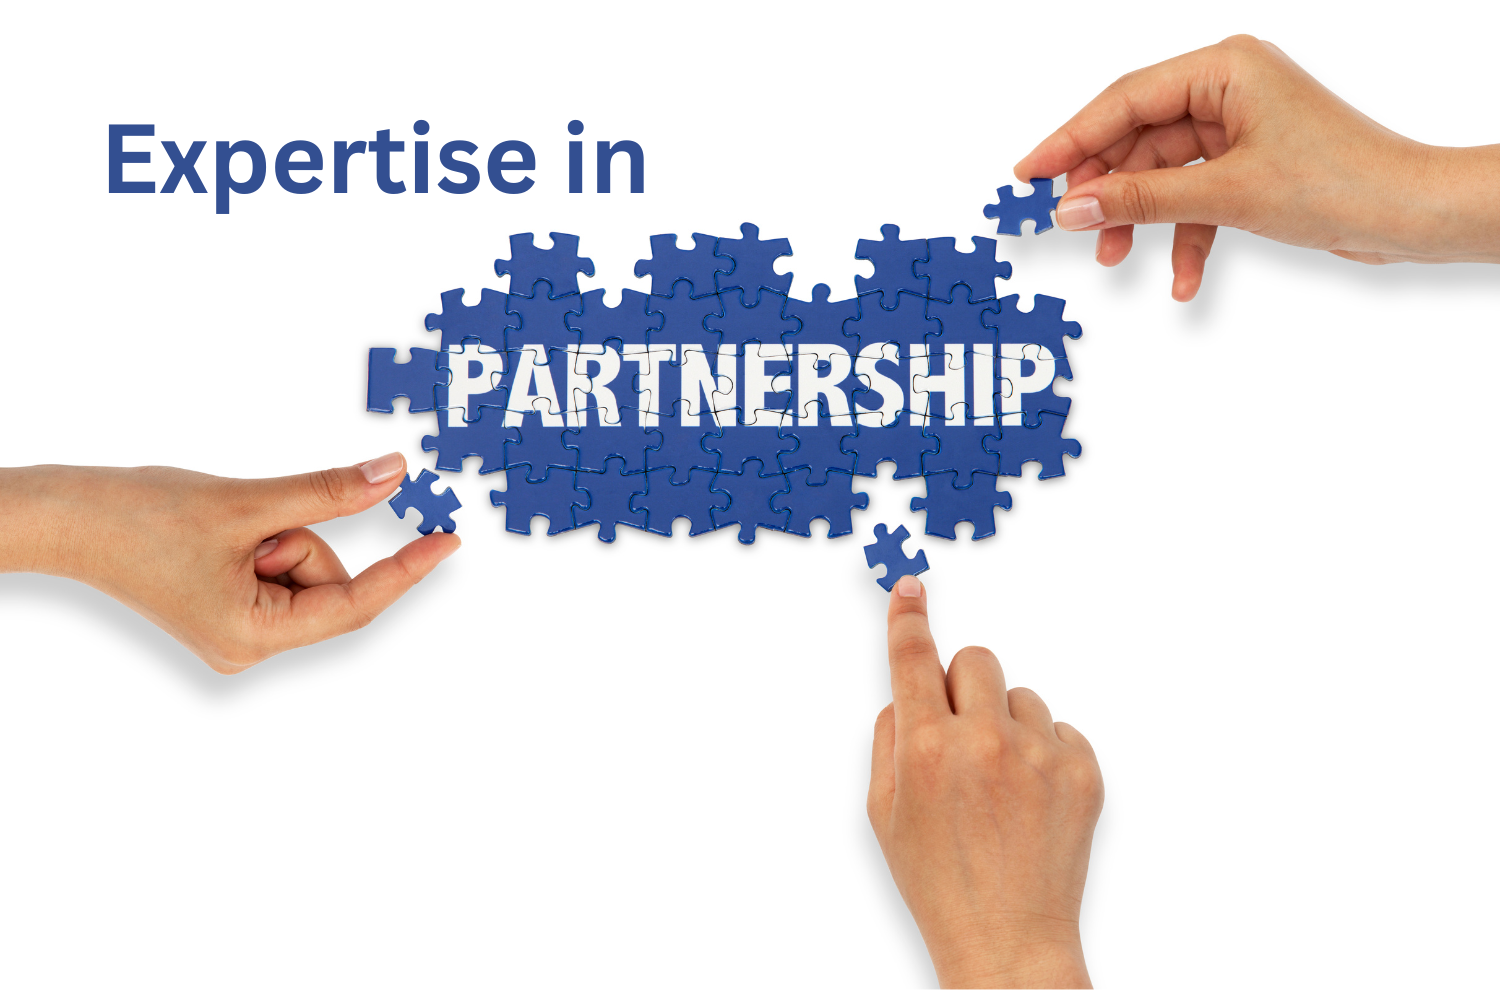 Three hands reach in from different directions to add pieces to a puzzle. An overlay reads "Expertise in," and the puzzle features the word "partnership."